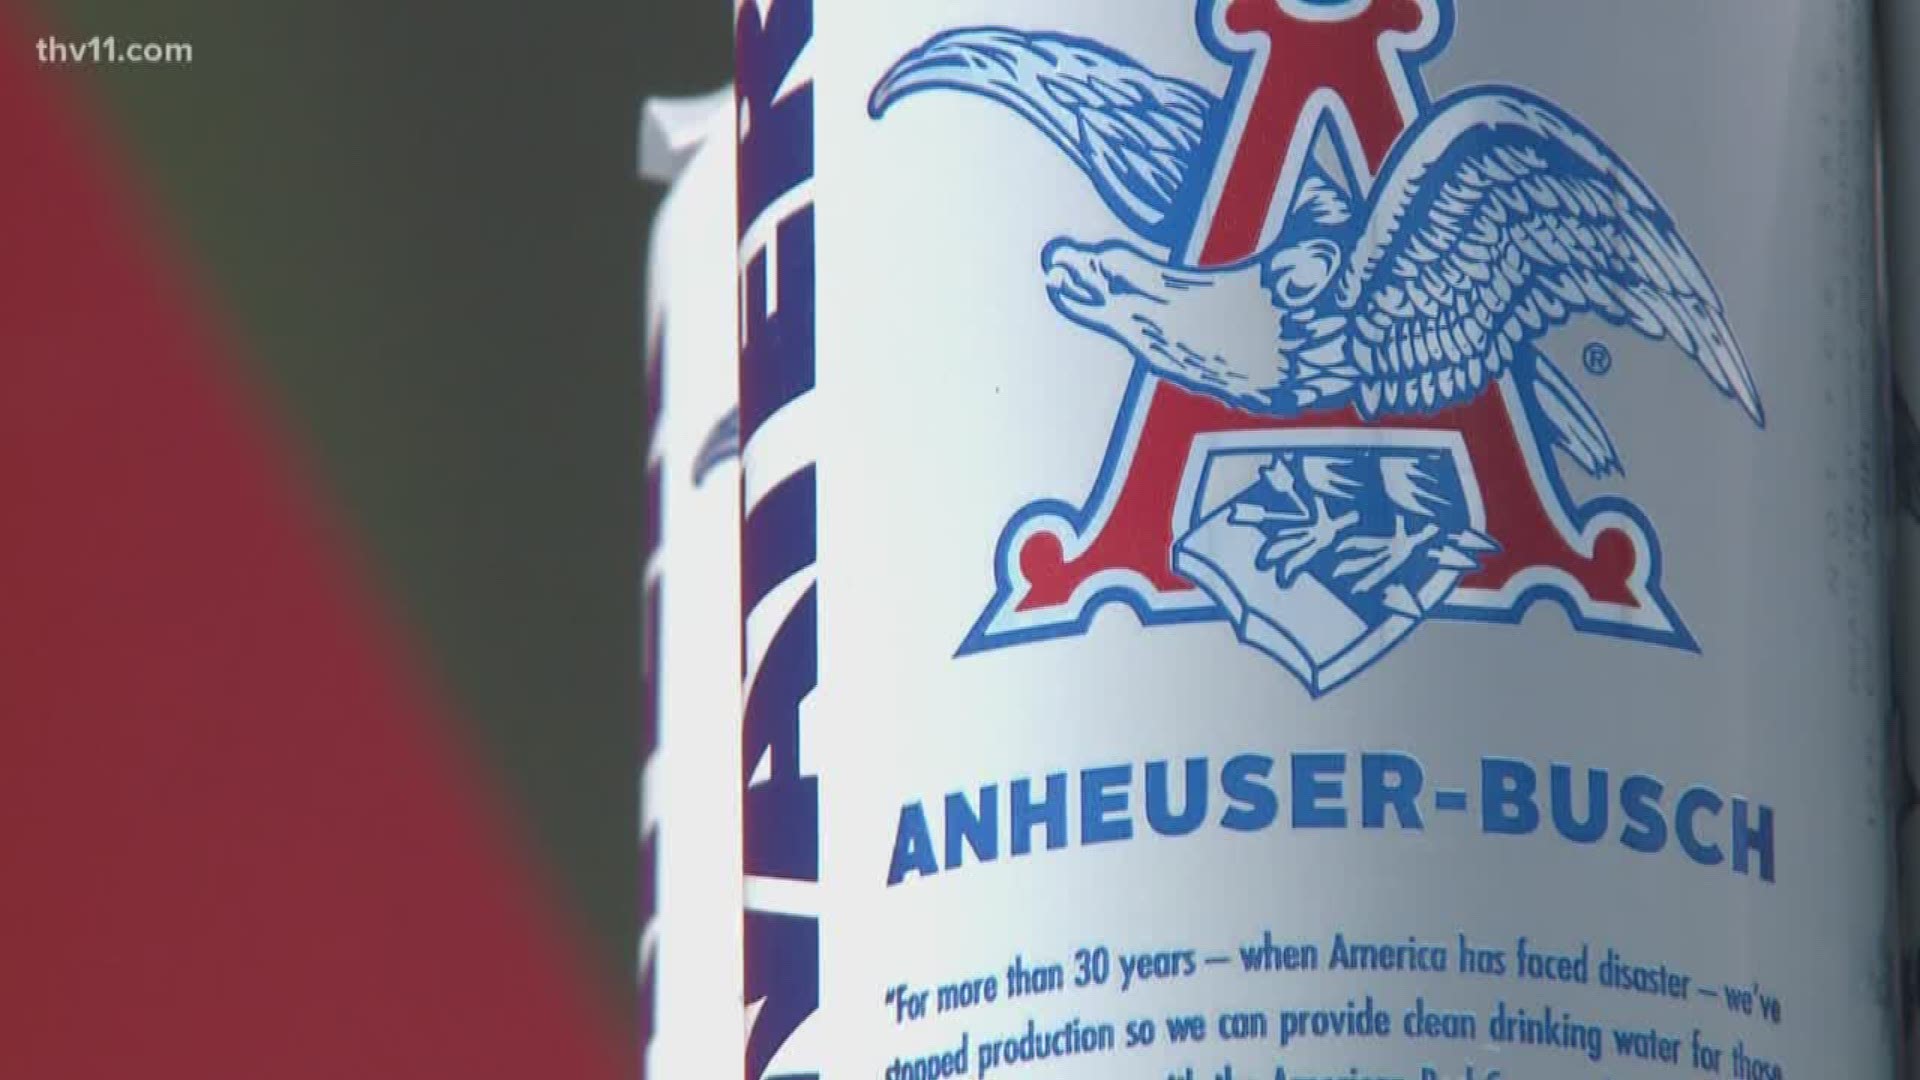 Anheuser-Busch put beer on hold and delivered more than 50,000 cans of emergency drinking water to the American Red Cross in Little Rock.